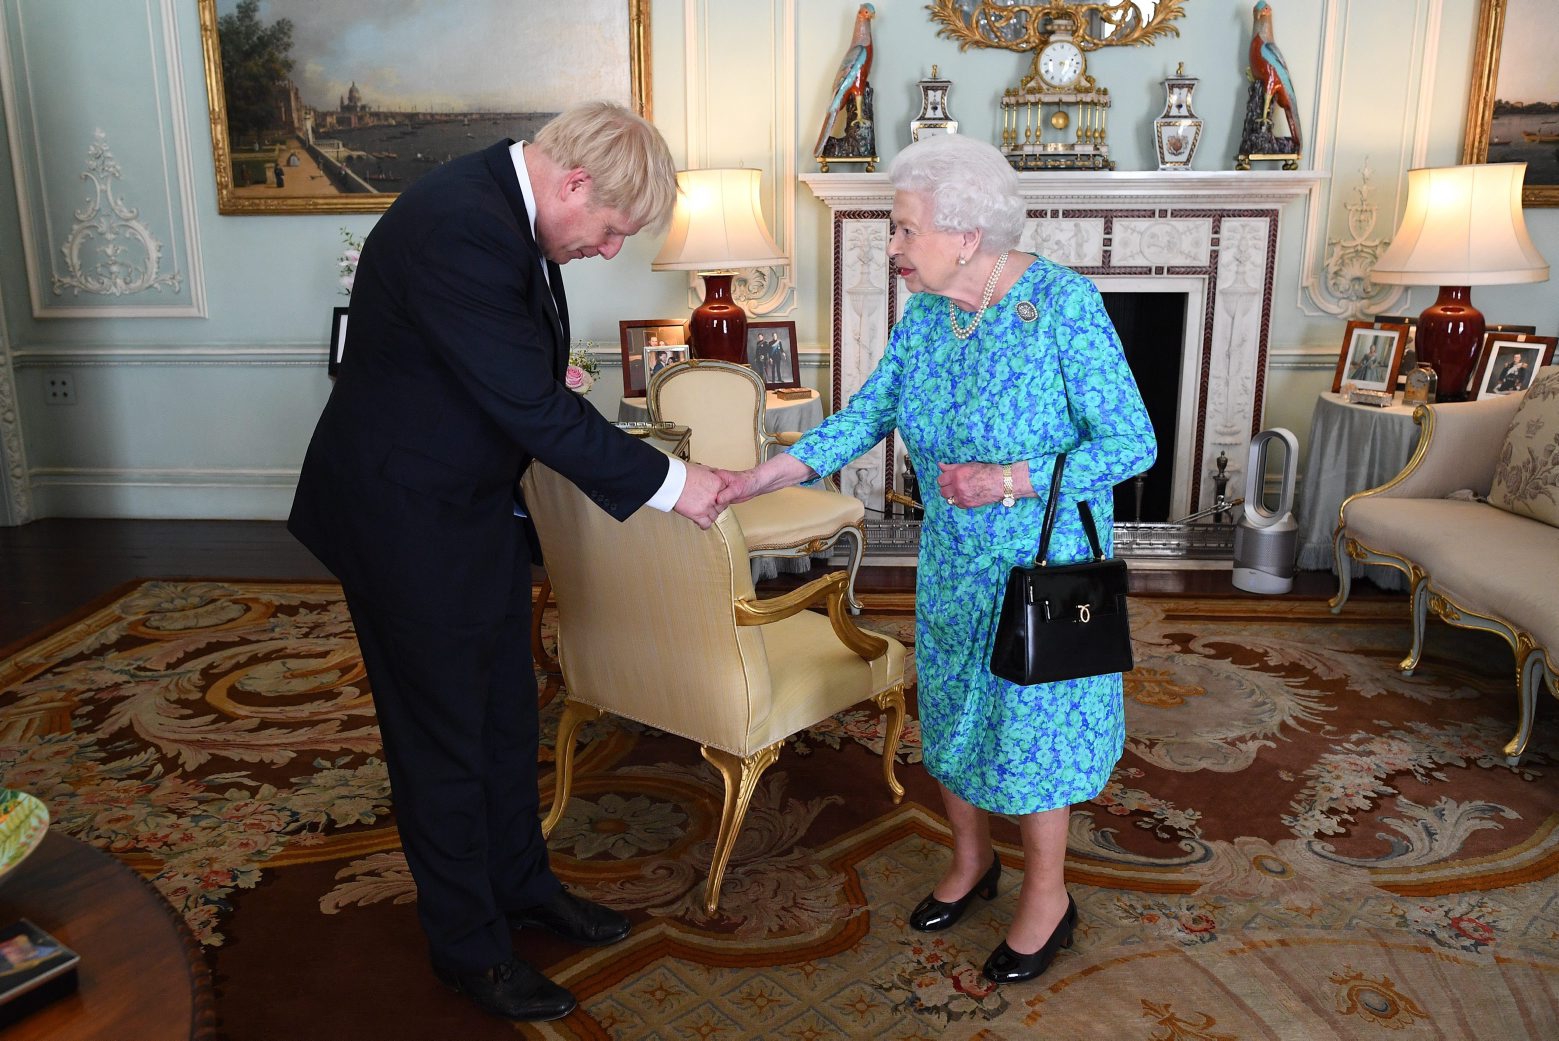 epa07737751 Britain's Queen Elizabeth II welcomes newly elected leader of the Conservative party Boris Johnson during an audience in Buckingham Palace, London, Britain, 24 July 2019 where she invited him to become Prime Minister and form a new government. Former London mayor and foreign secretary Boris Johnson is taking over the post after his election as party leader was announced the previous day. Theresa May stepped down as British Prime Minister following her resignation as Conservative Party leader on 07 June.  EPA/VICTORIA JONES / POOL BRITAIN GOVERNMENT PRIME MINISTER